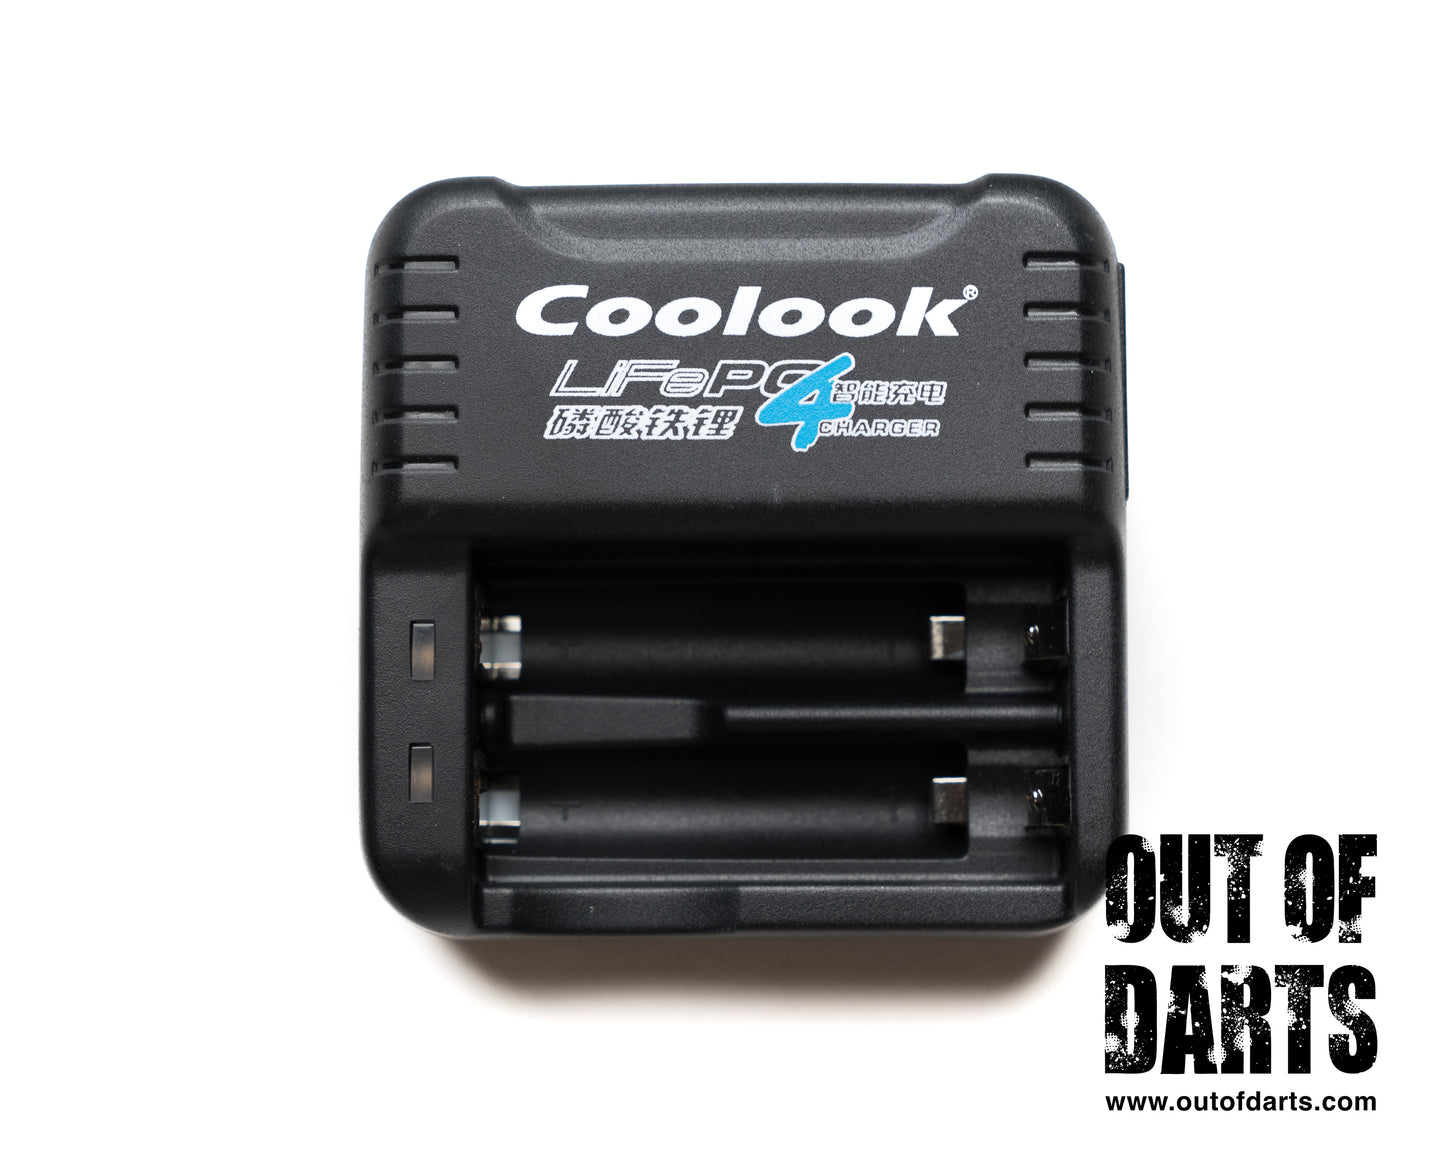 Coolook IMR 14500 Charger (basic IMR charger)